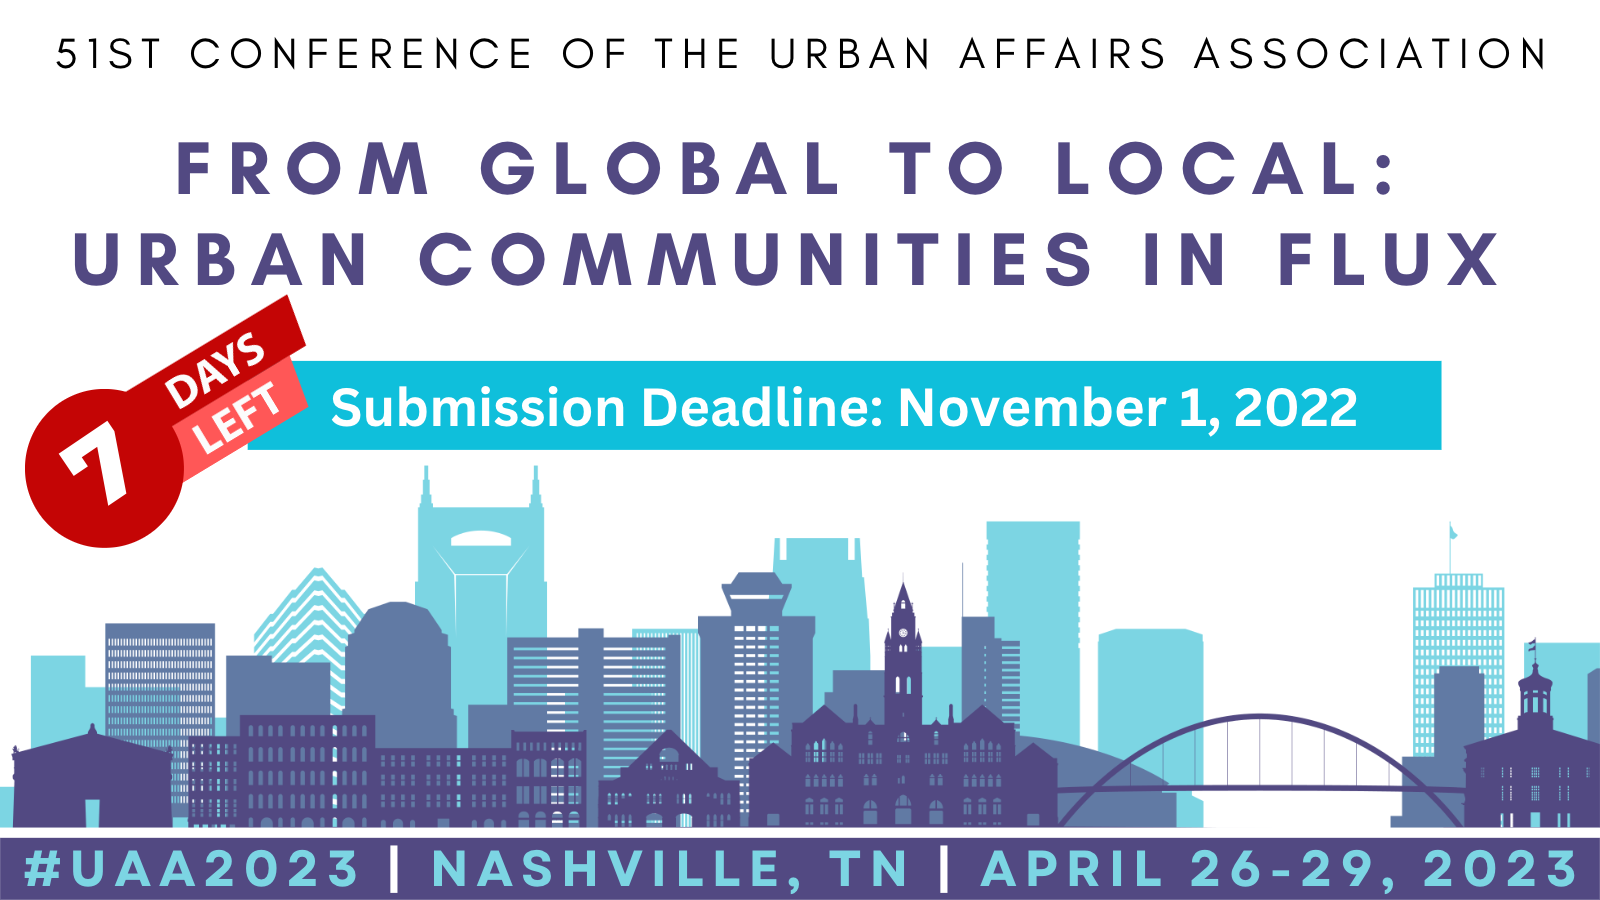 7 days left to submit a conference proposal